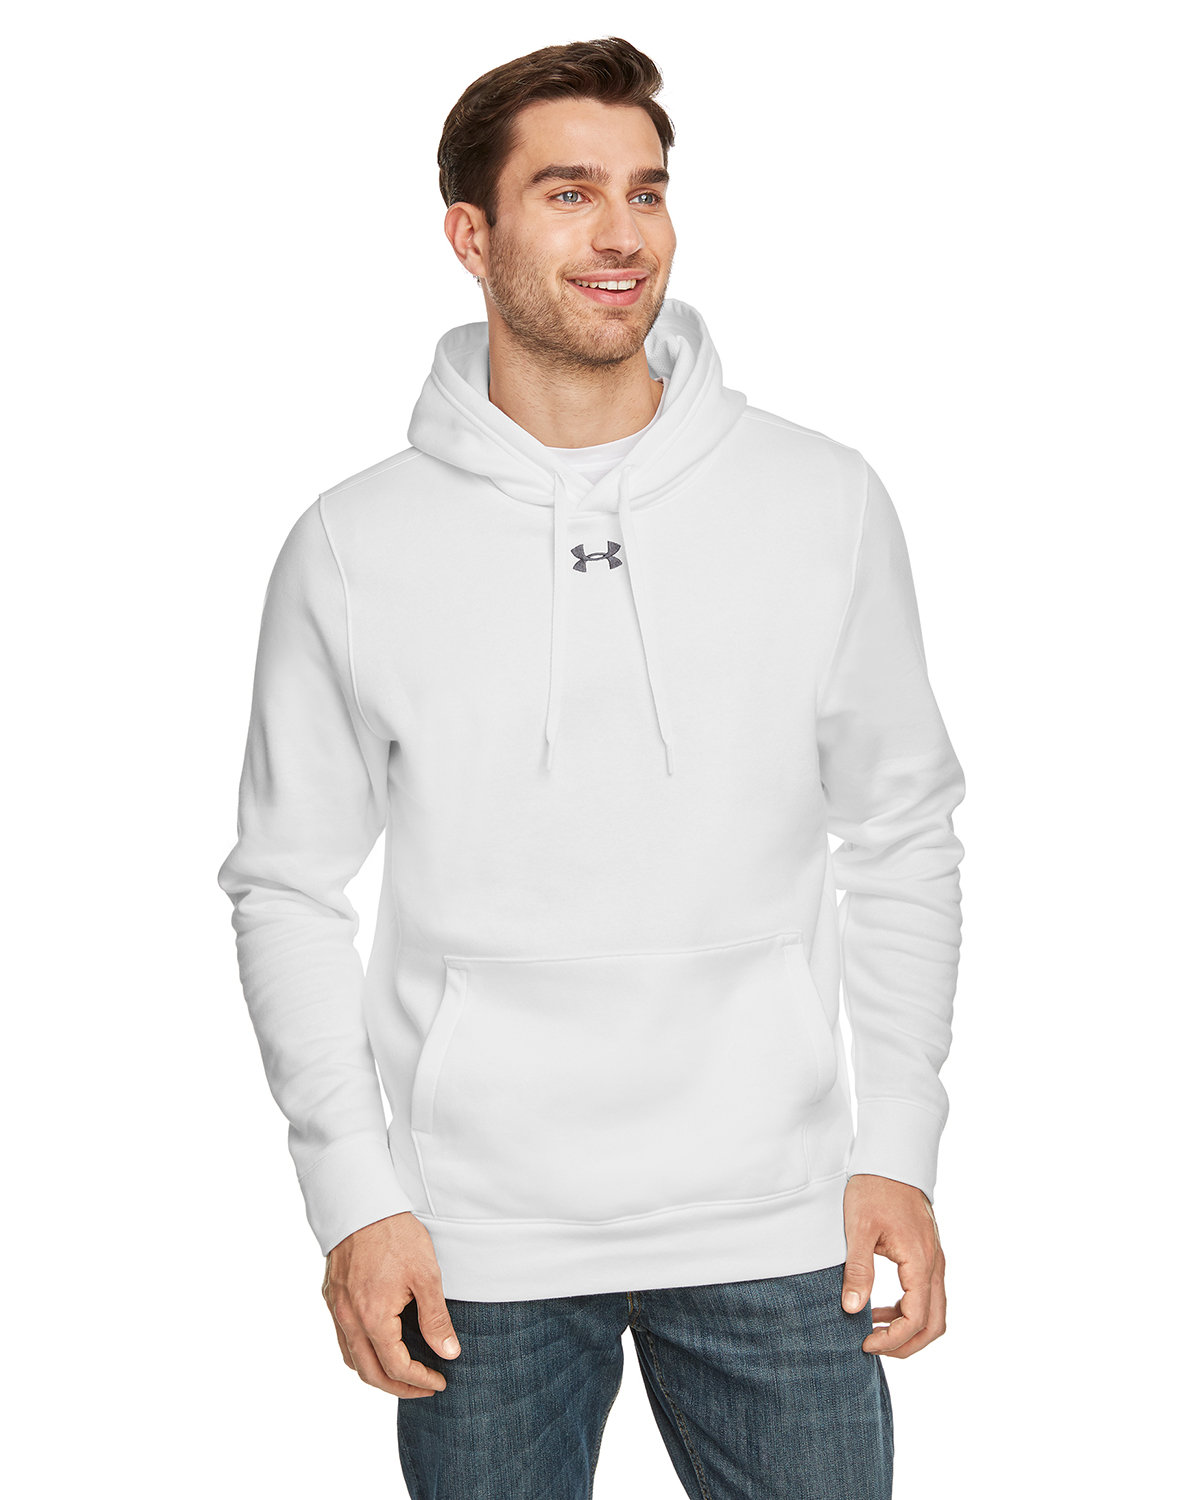 Under Armour Mens Hustle Fleece Hoodie - Small - White - [1300123-100] –  Parks Sports Line